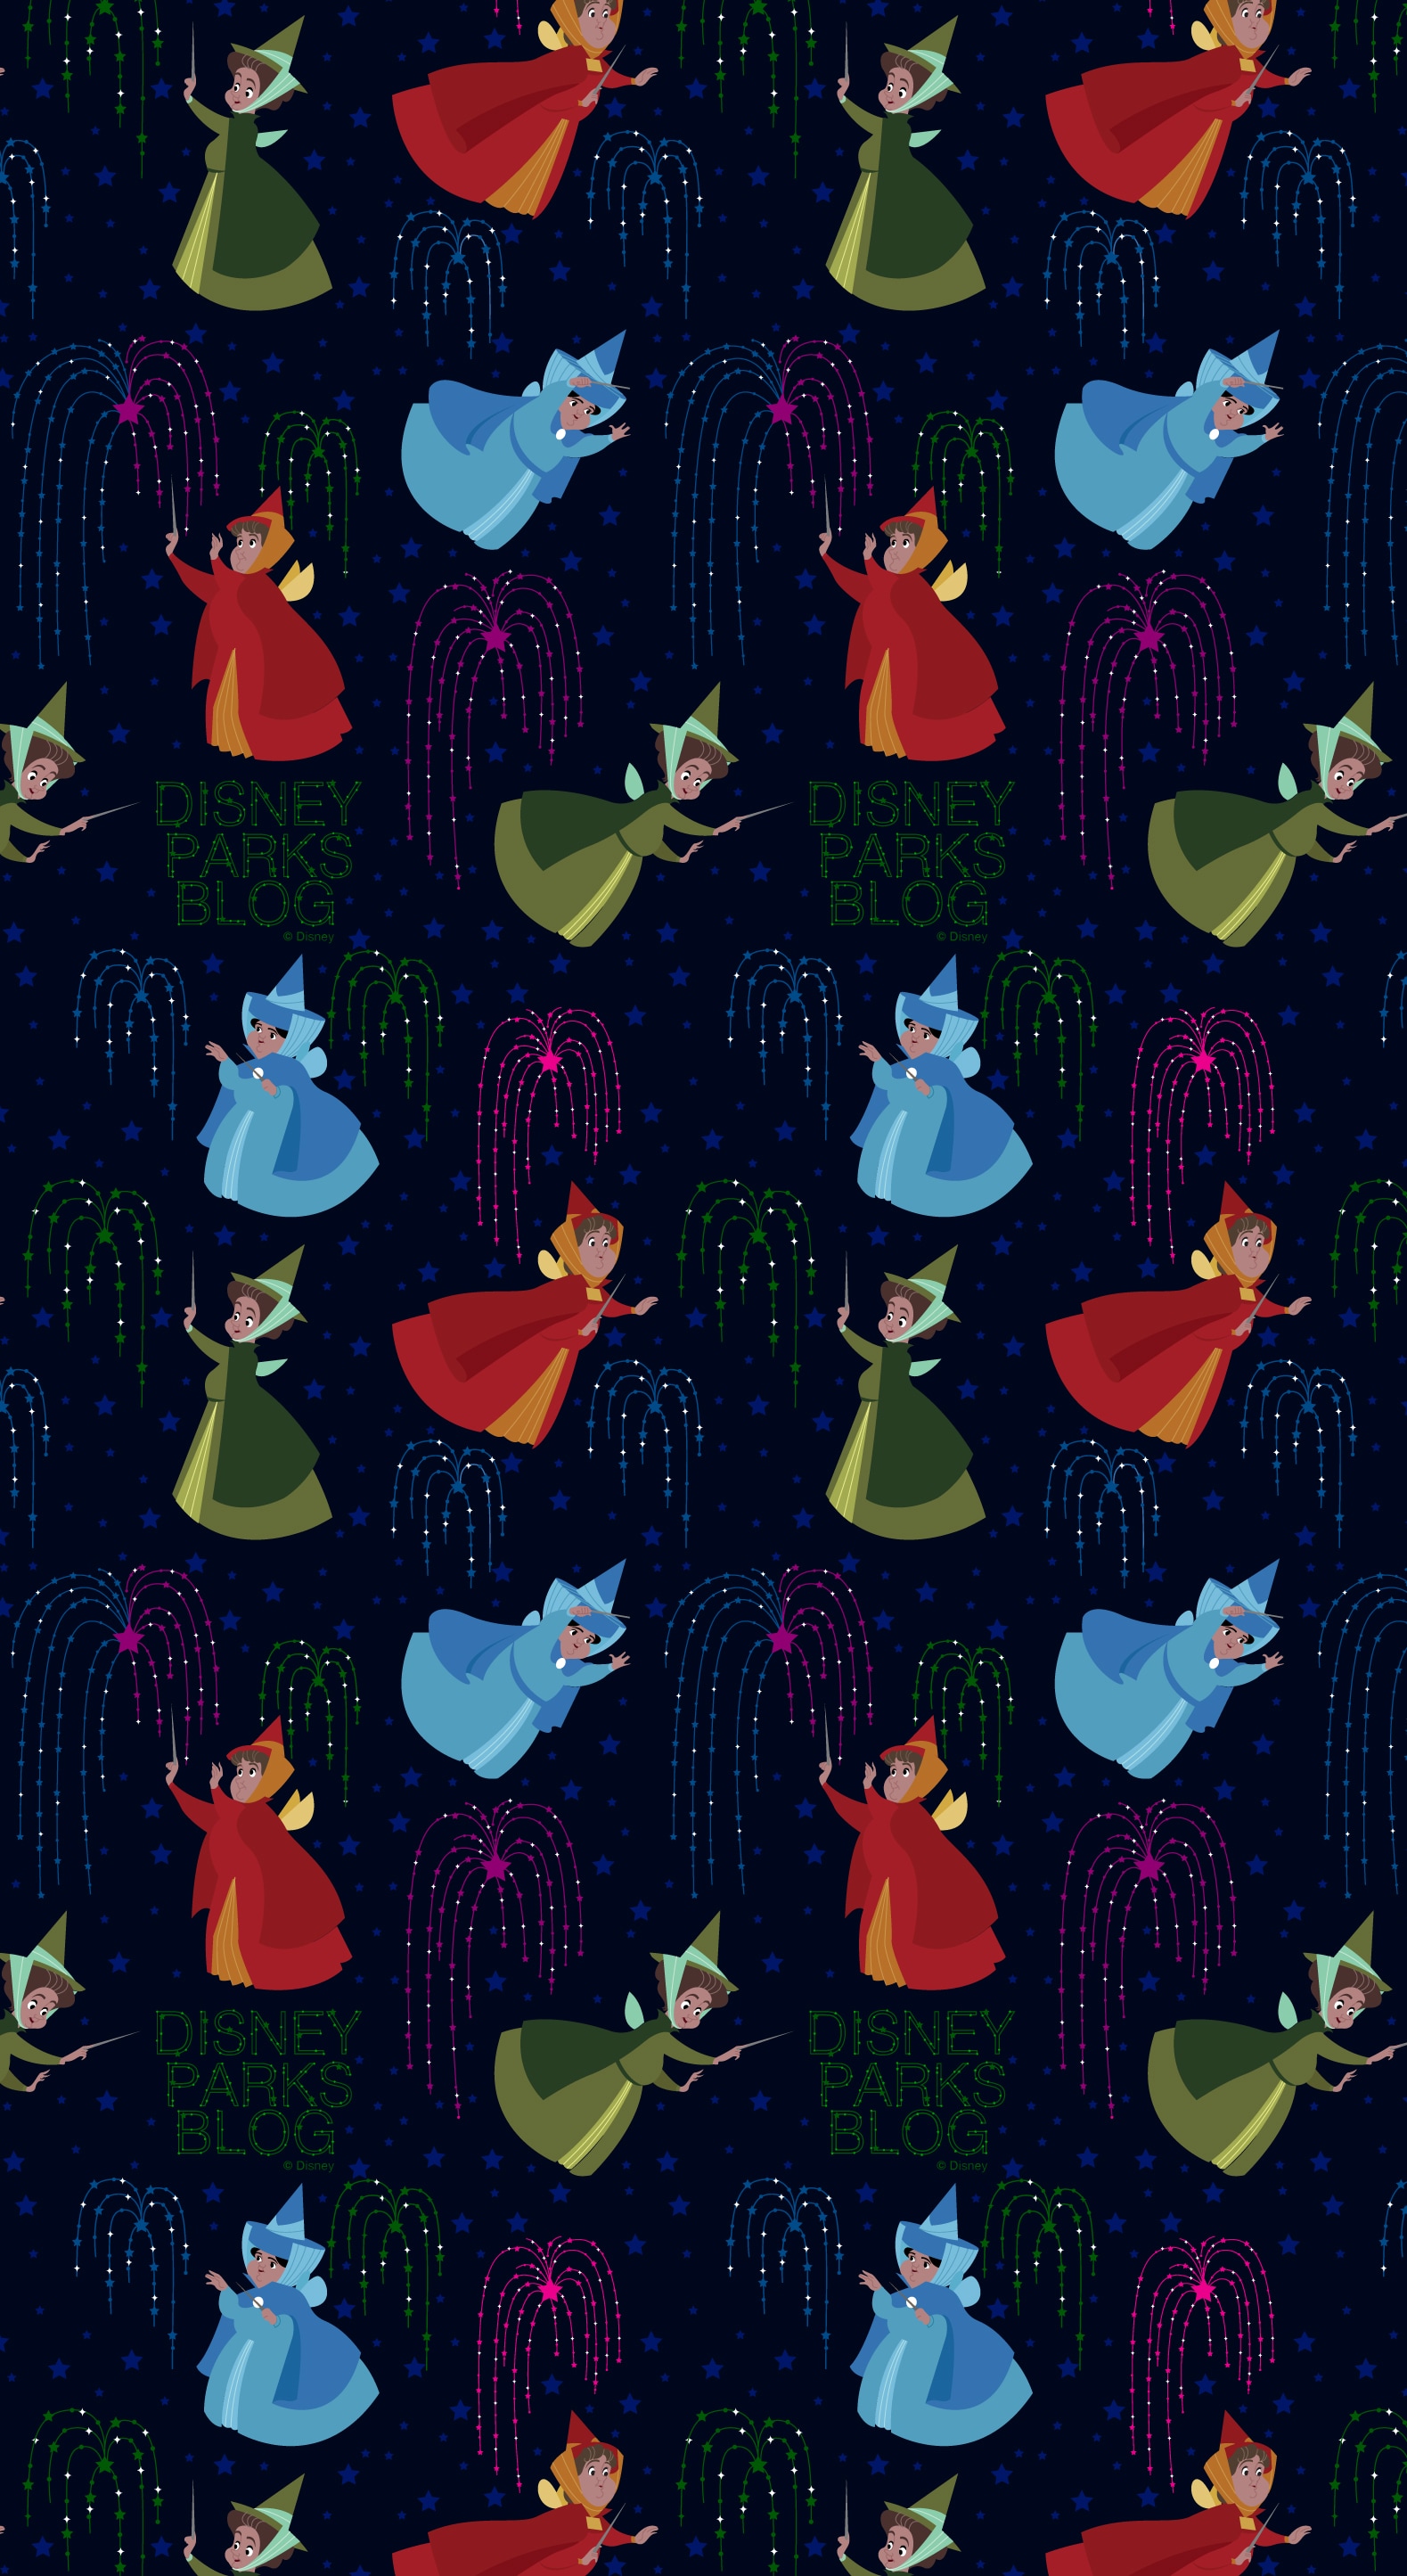 2019 Fourth of July Fireworks Wallpaper featuring Flora, Fauna and  Merryweather – iPhone/Android | Disney Parks Blog